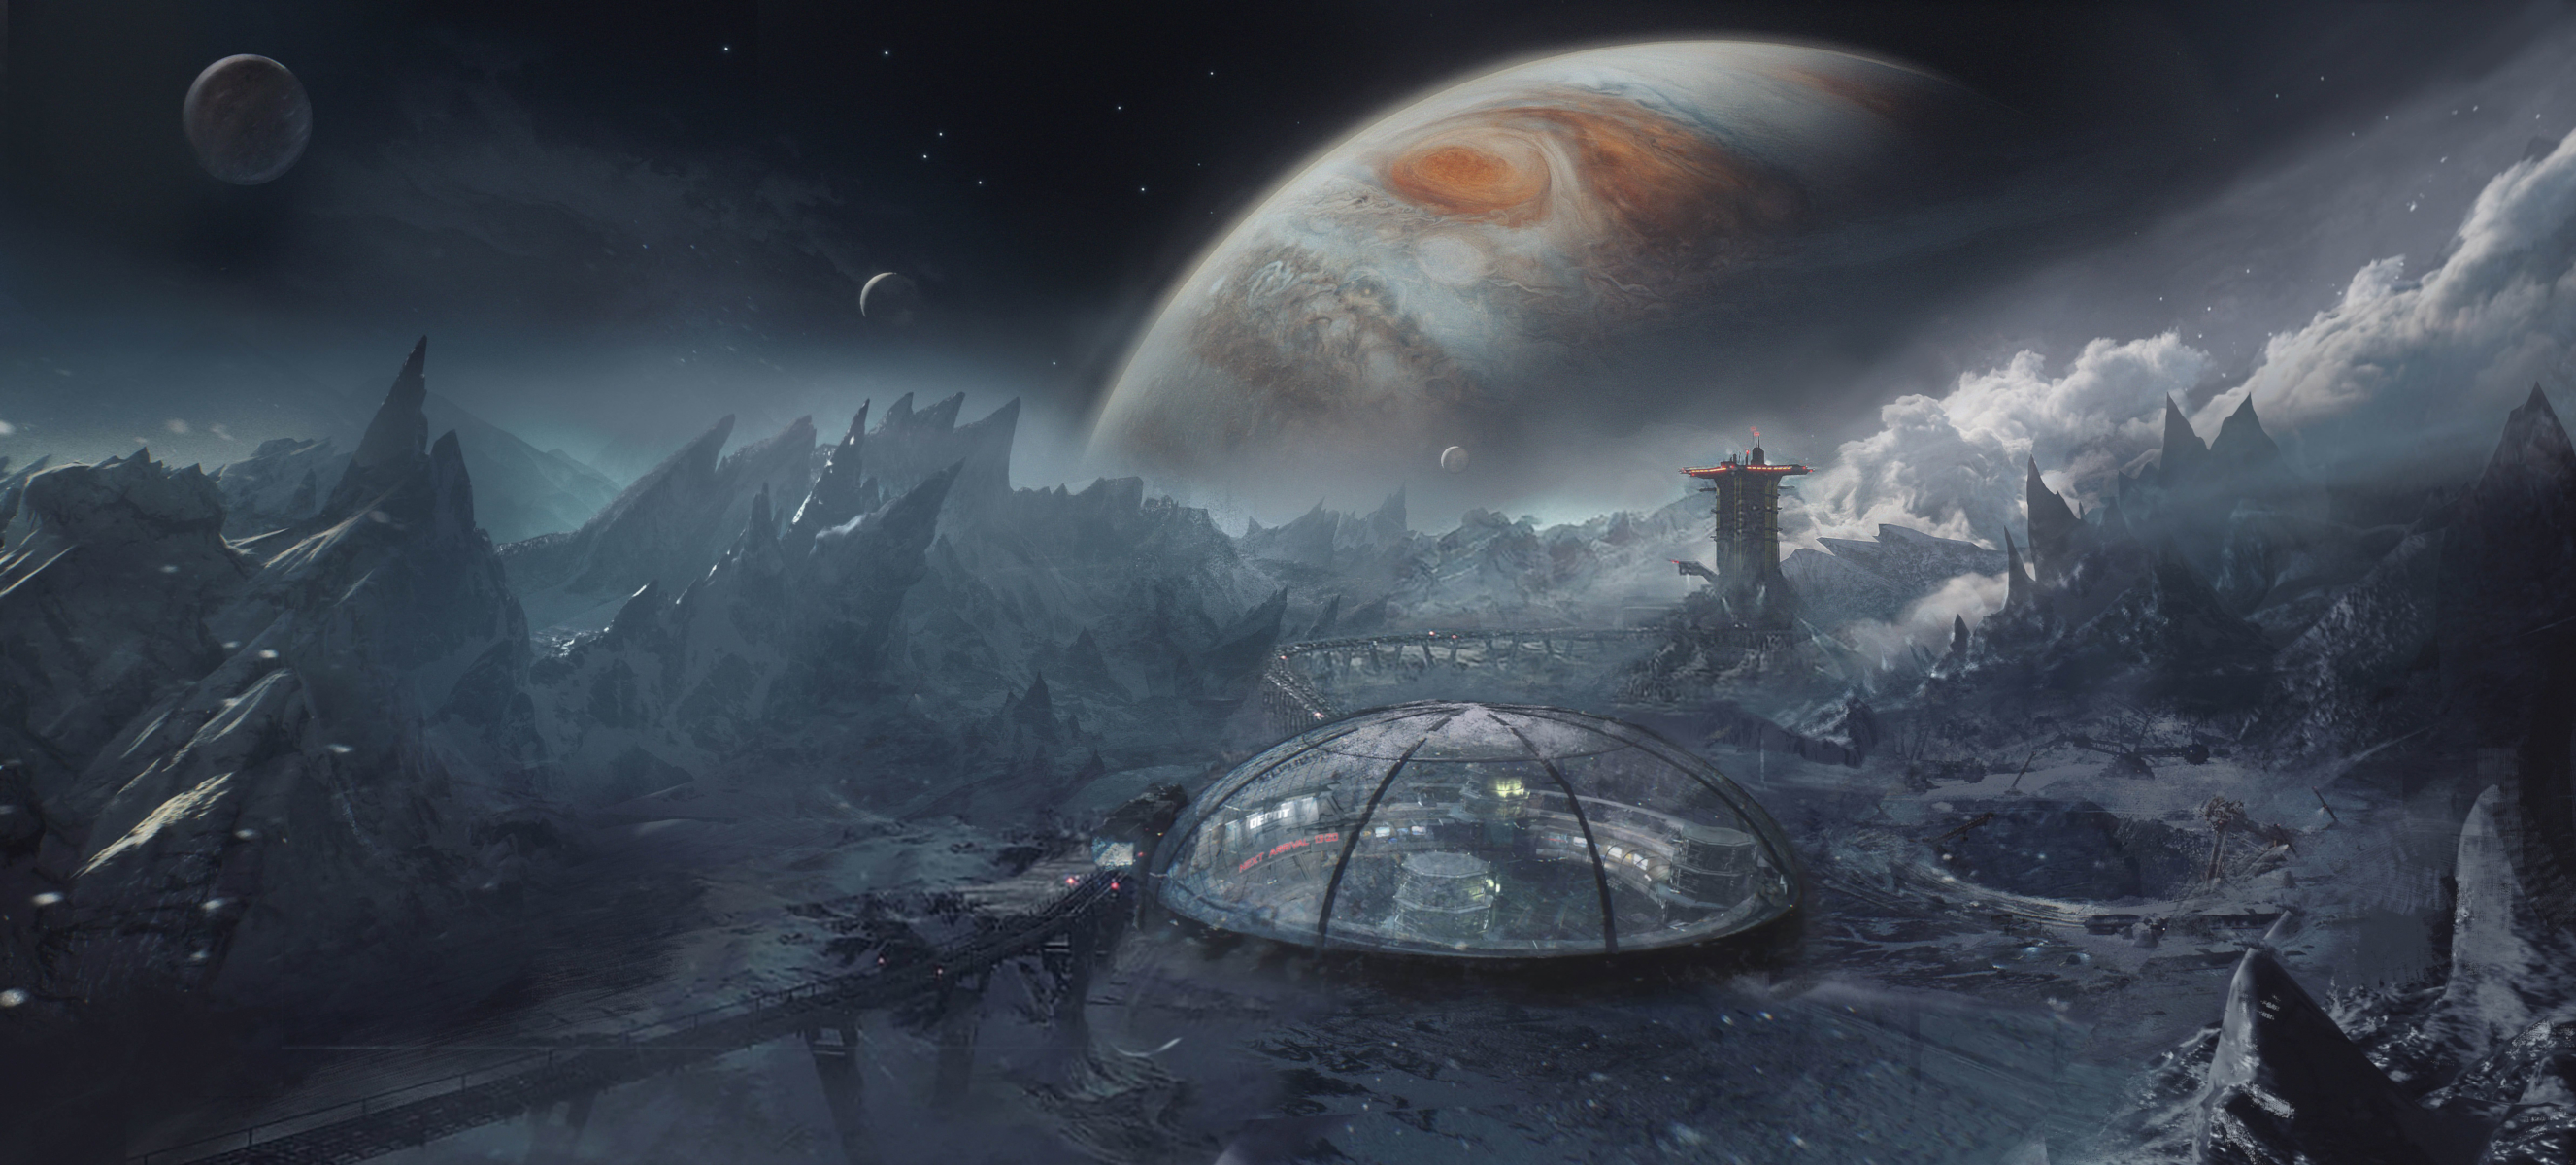 The Callisto Protocol: A highly detailed HD desktop wallpaper featuring stunning graphics from the popular video game.